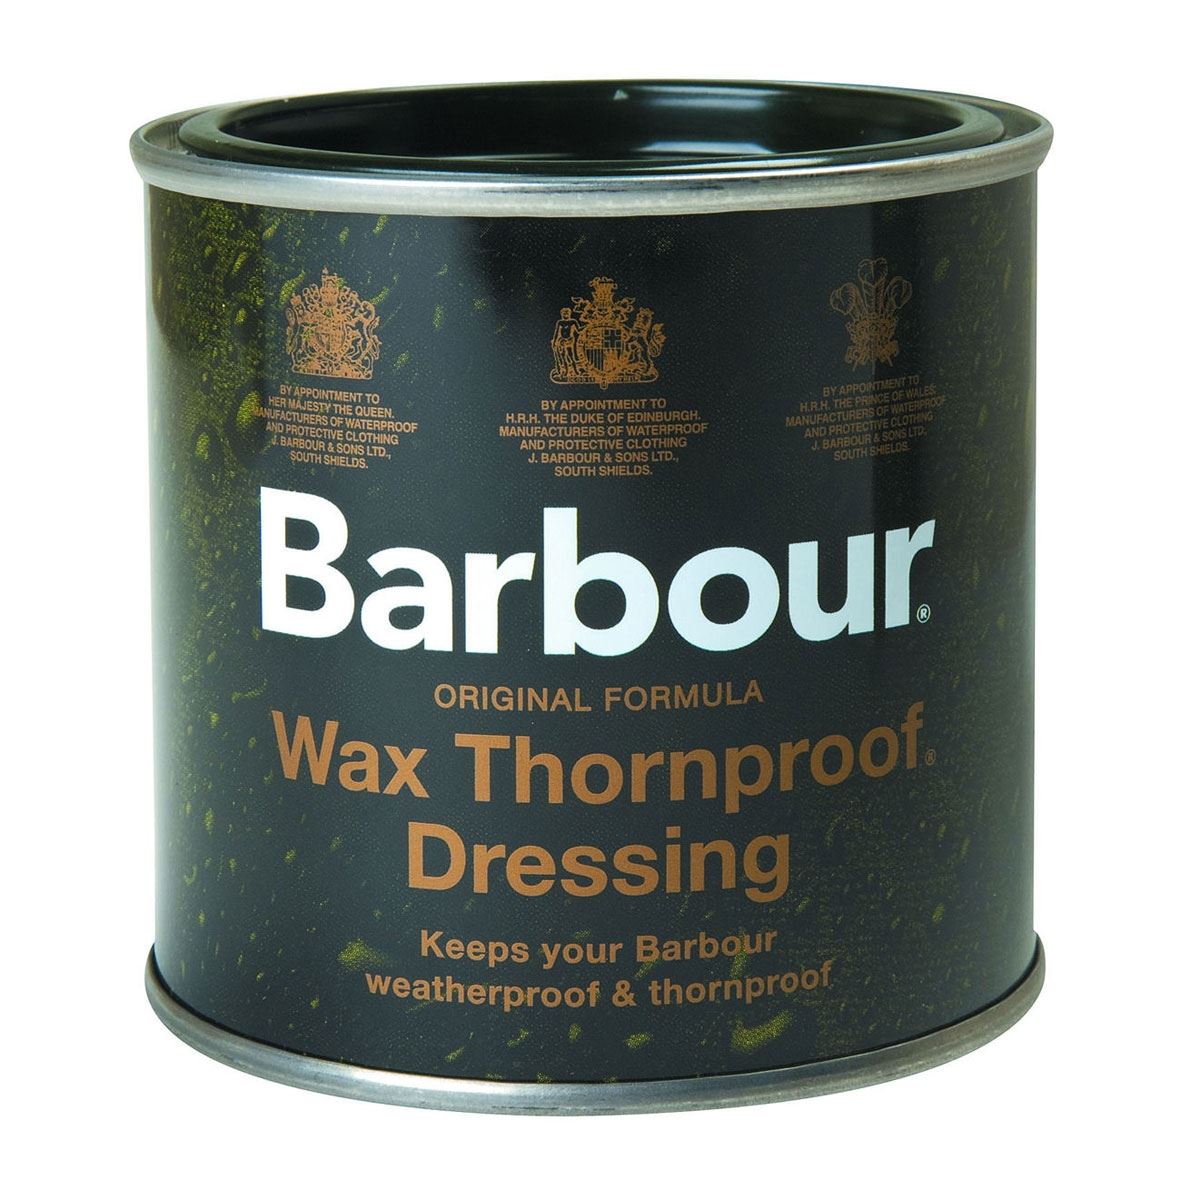 What is the recommended frequency for re-waxing a Barbour jacket using barbour wax?